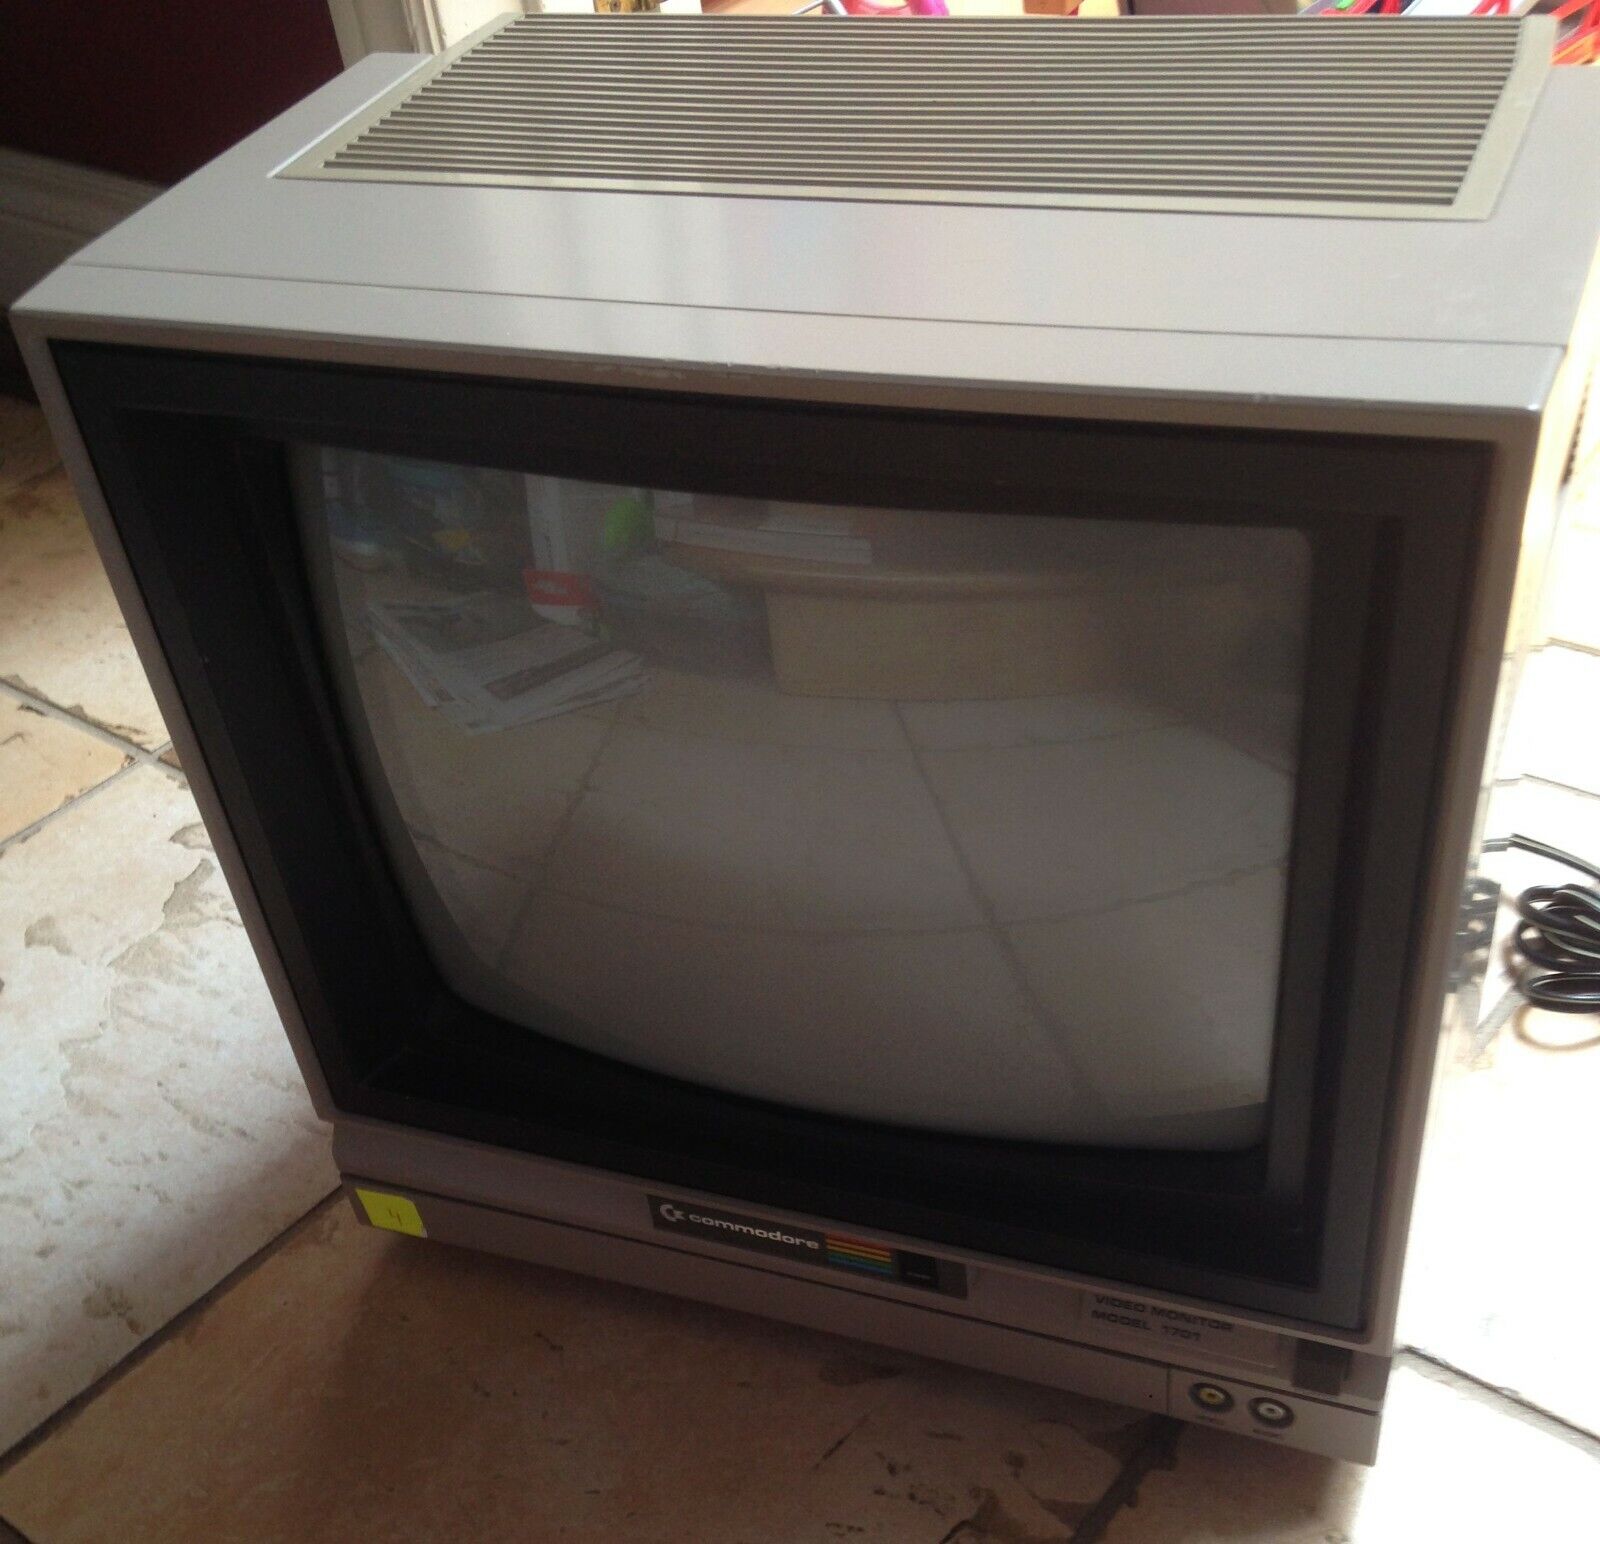 Commodore 64 Video Gaming Monitor Model Commodore 1701 - Tested - Working - 1983